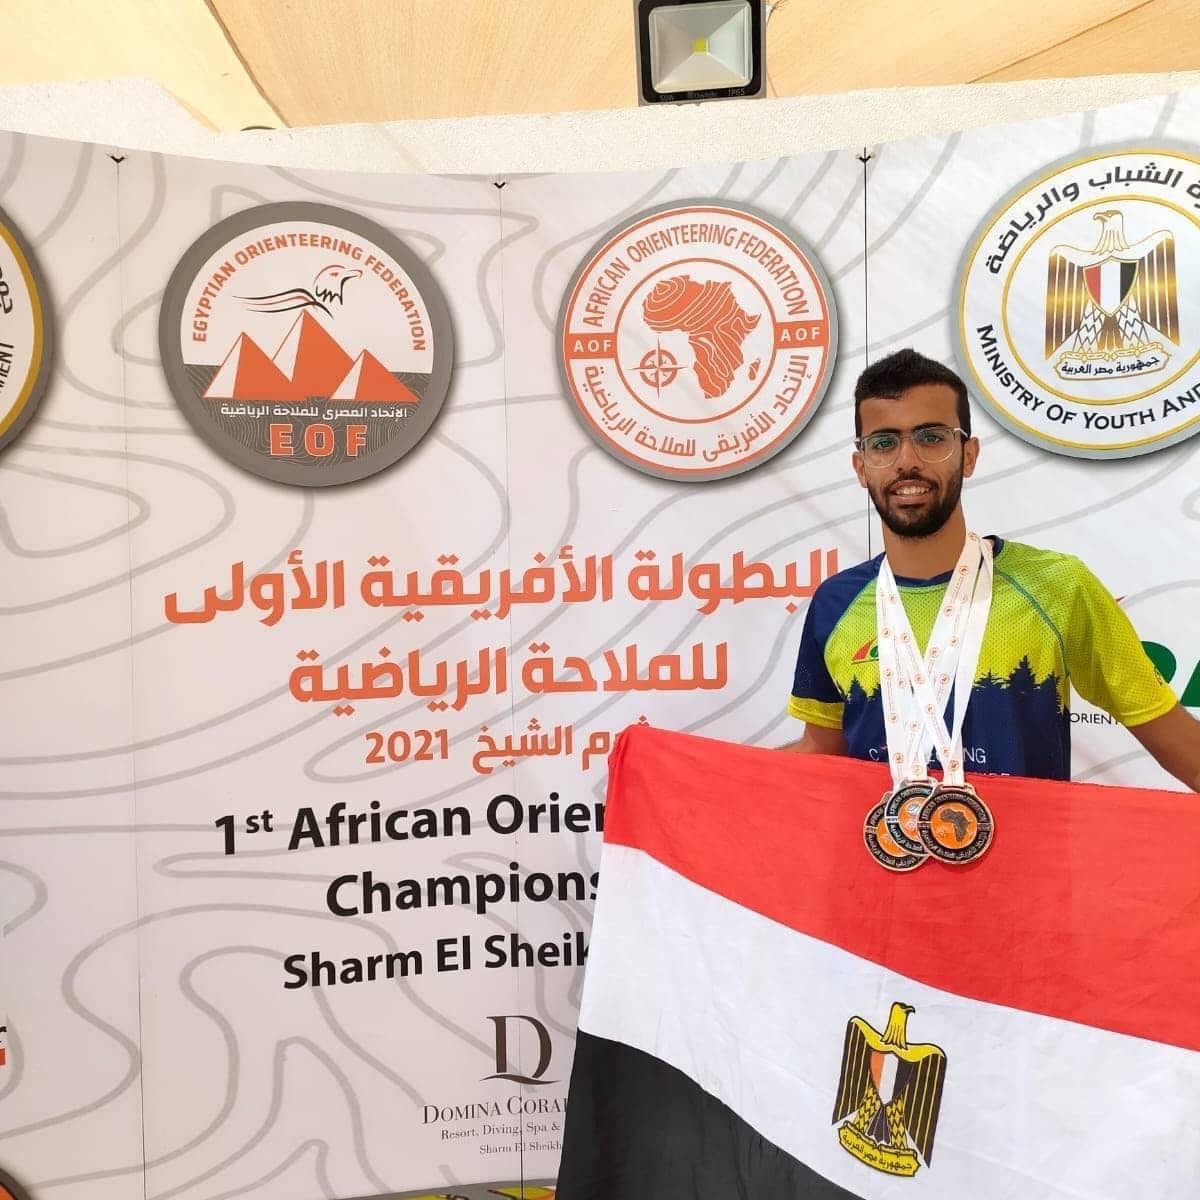 The participation of the student Abdul Rahman Mahmoud and his victory in the African Sports Navigation Championship